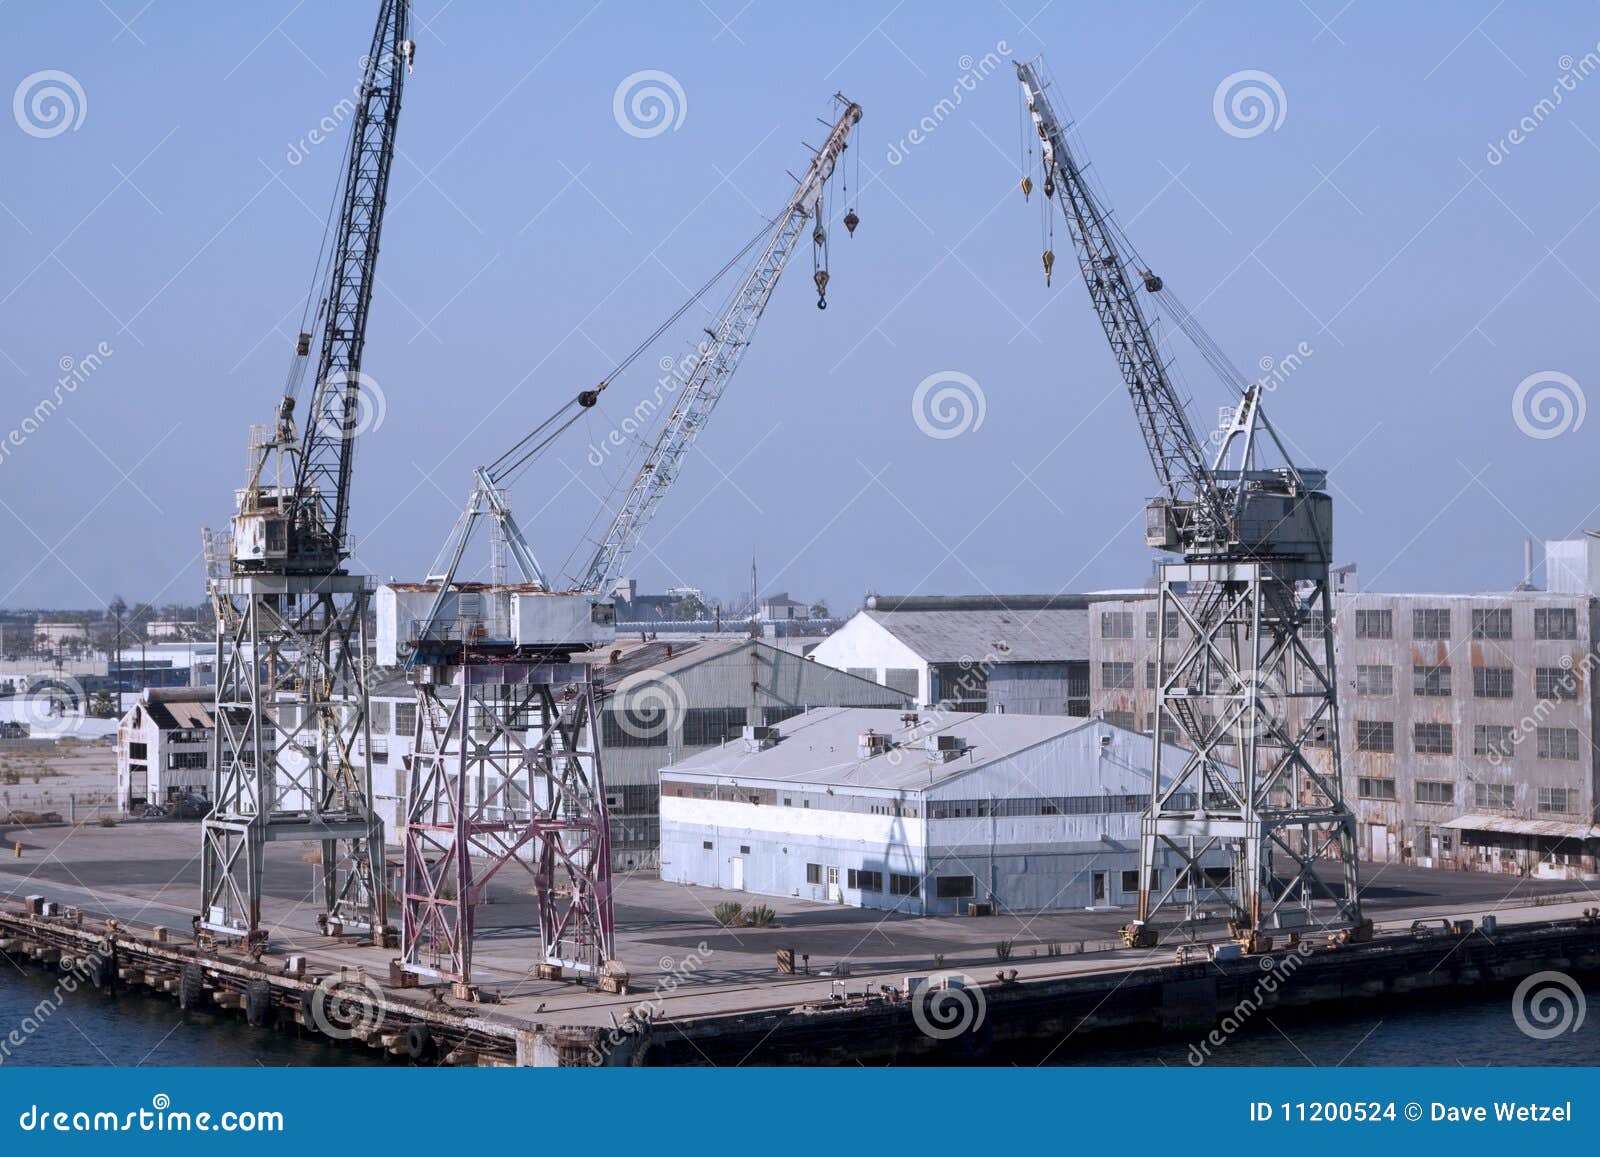 Old Fashion Cranes For Loading Ships Stock Images Image 11200524